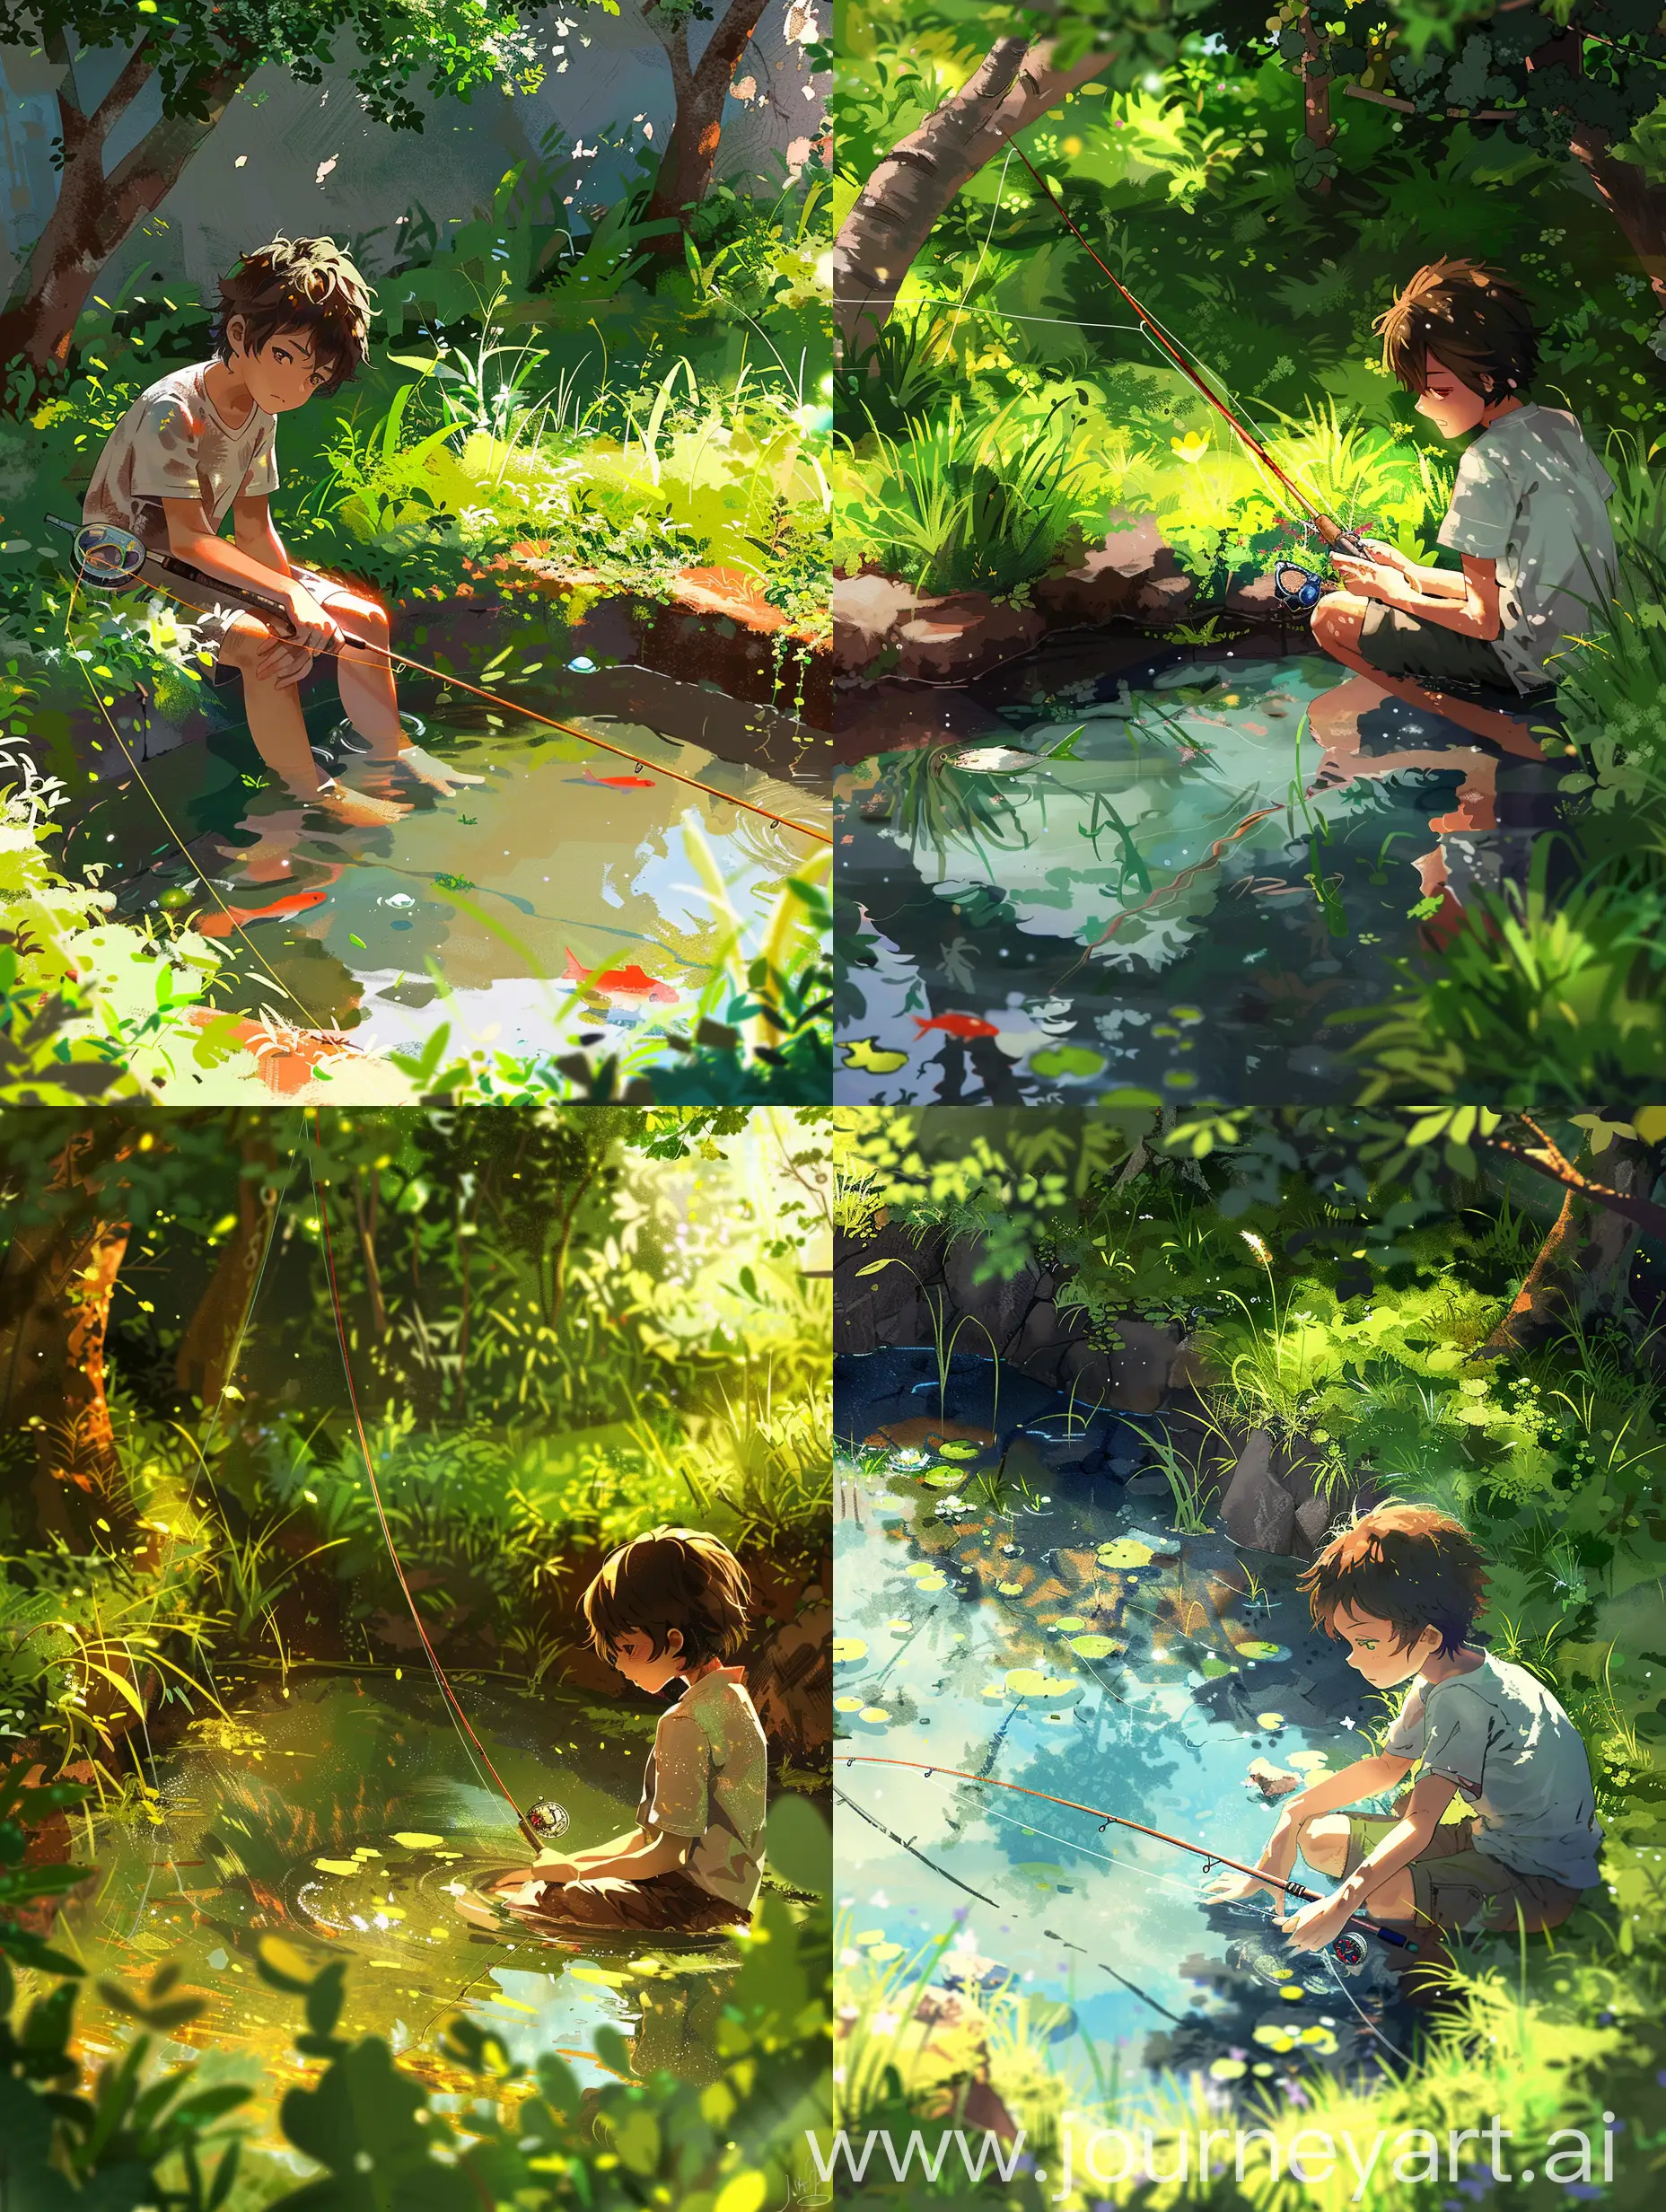 Shojo anime style,A young boy who is 15 year old with a bored expression sits by a small pond, fishing rod in hand. It’s a bright summer day, and the pond is surrounded by lush green grass and a few trees.avoid bad and distorted view of his body and hands.